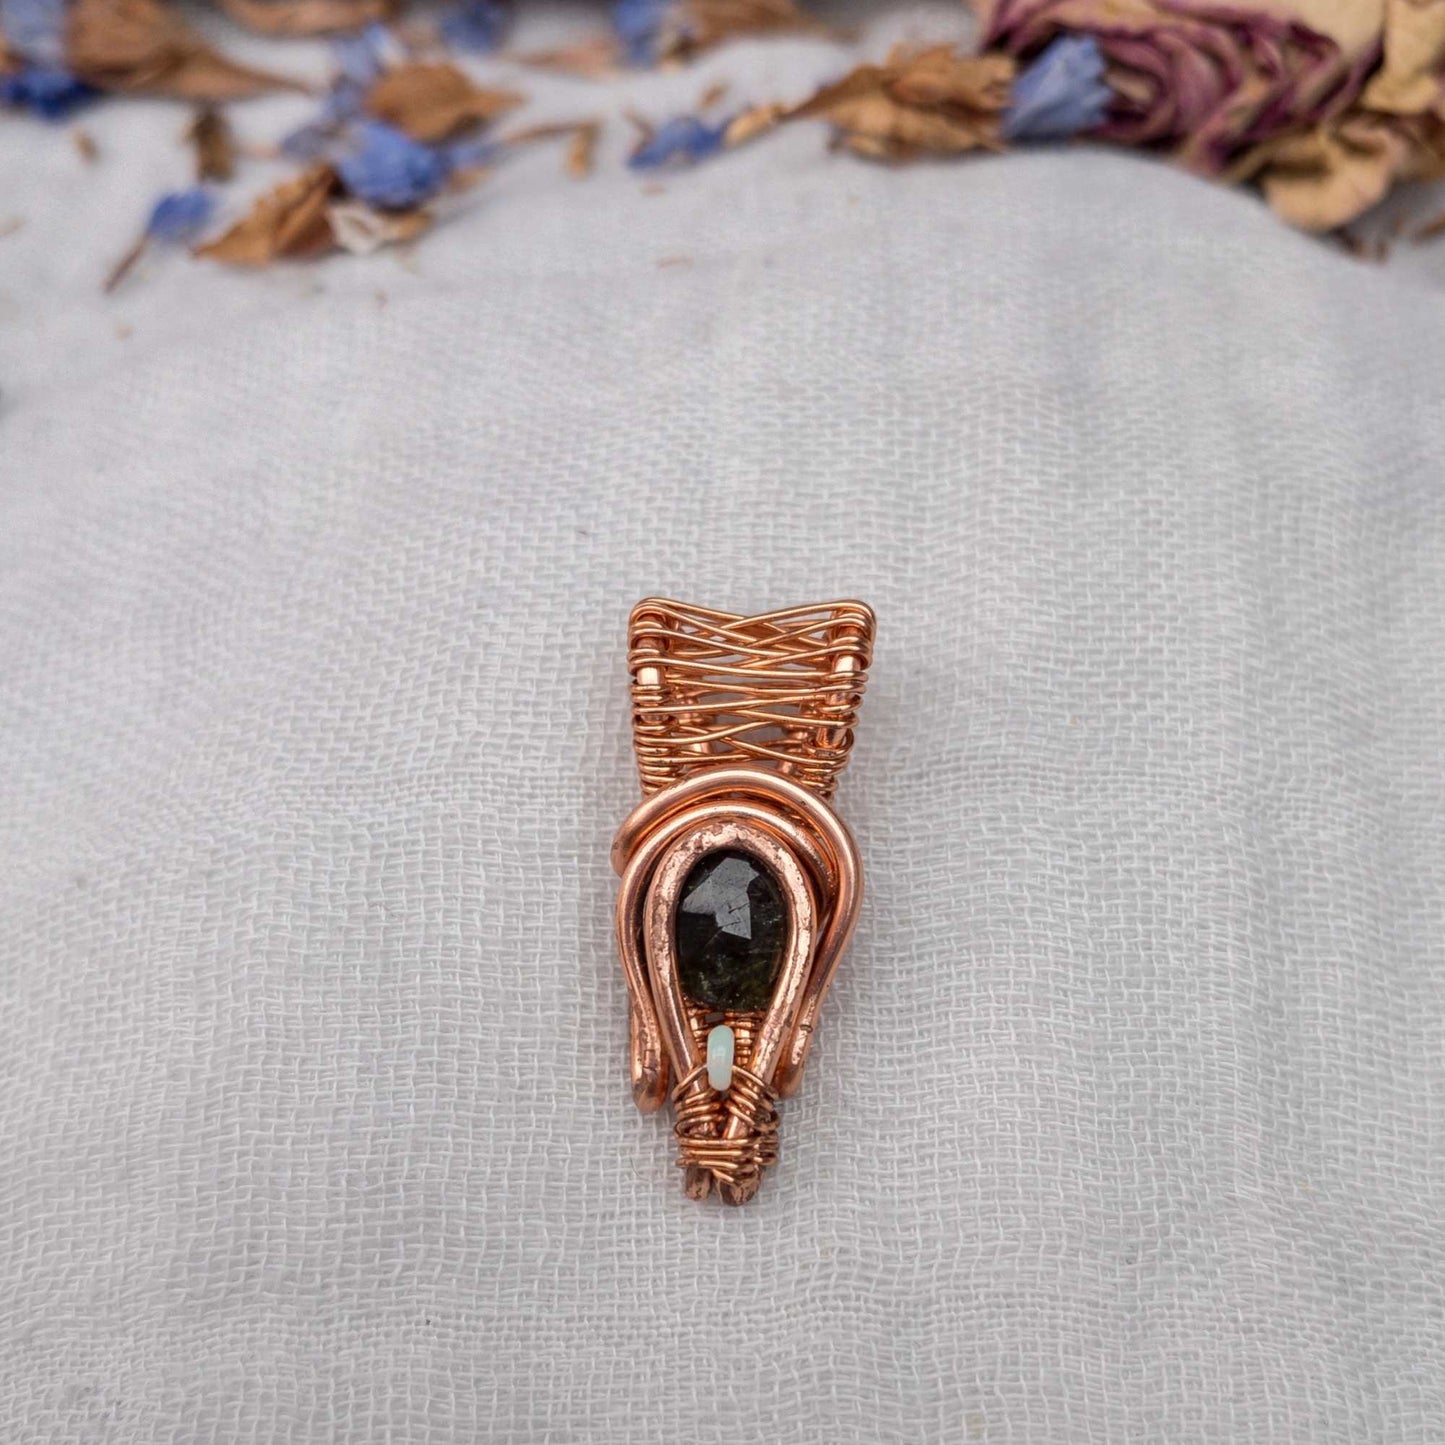 deep green tourmaline and opal wire wrapped pendant in copper wire